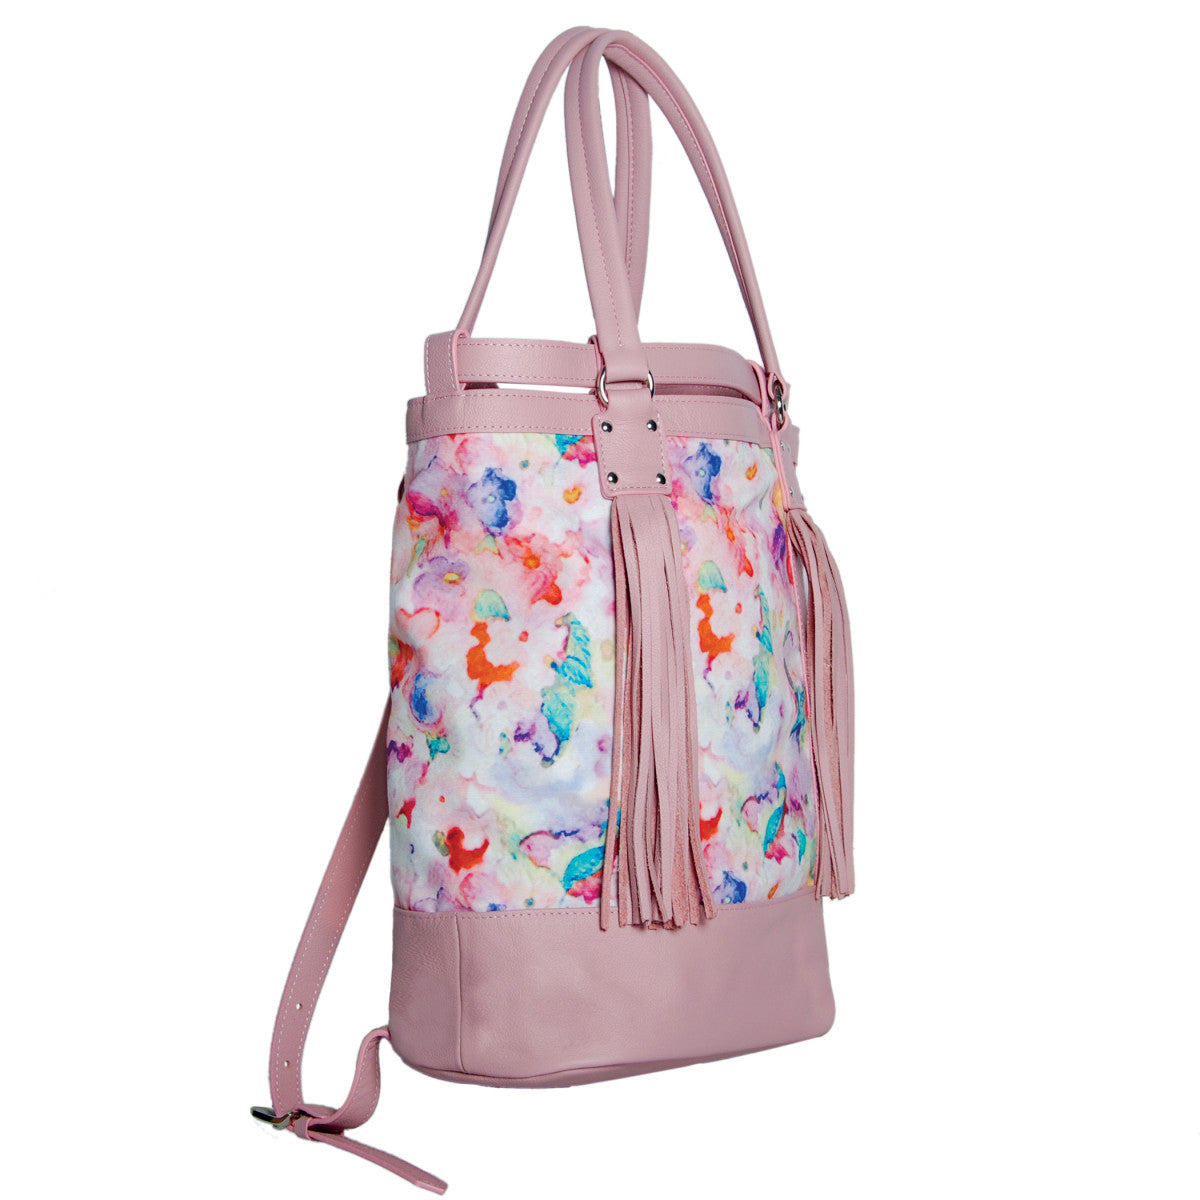 MONET: Backpack With Long Tassels